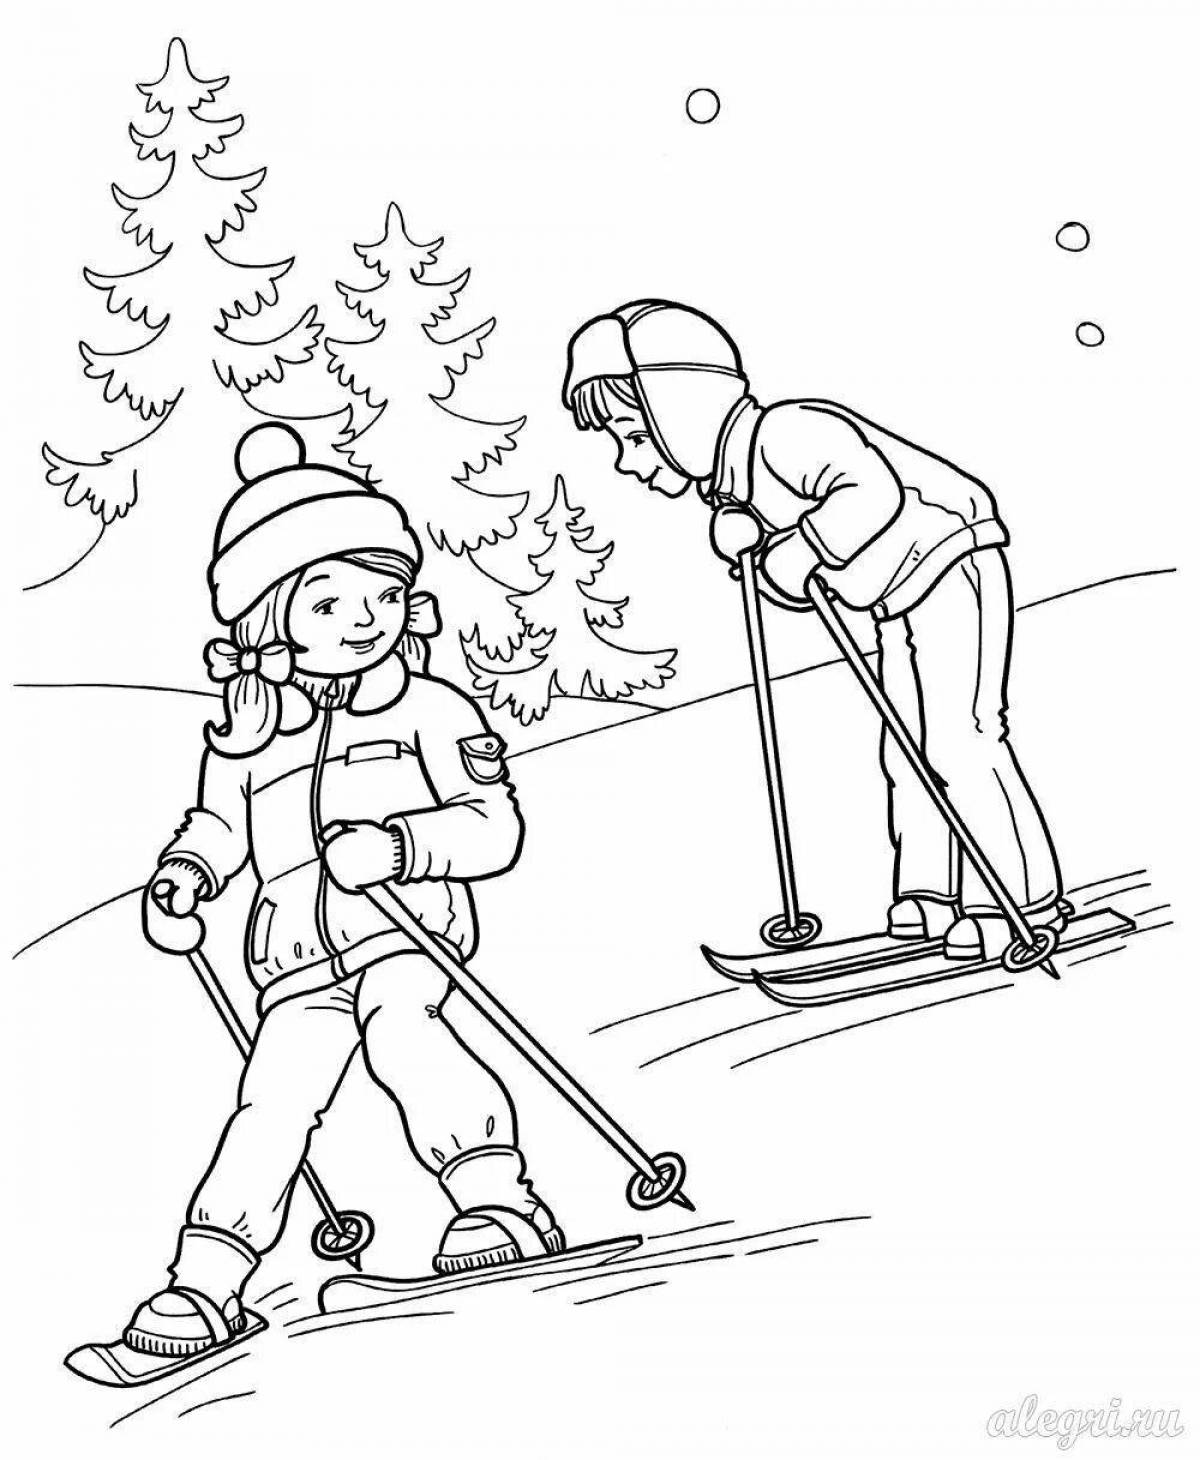 Radiant skier coloring book for children 6-7 years old